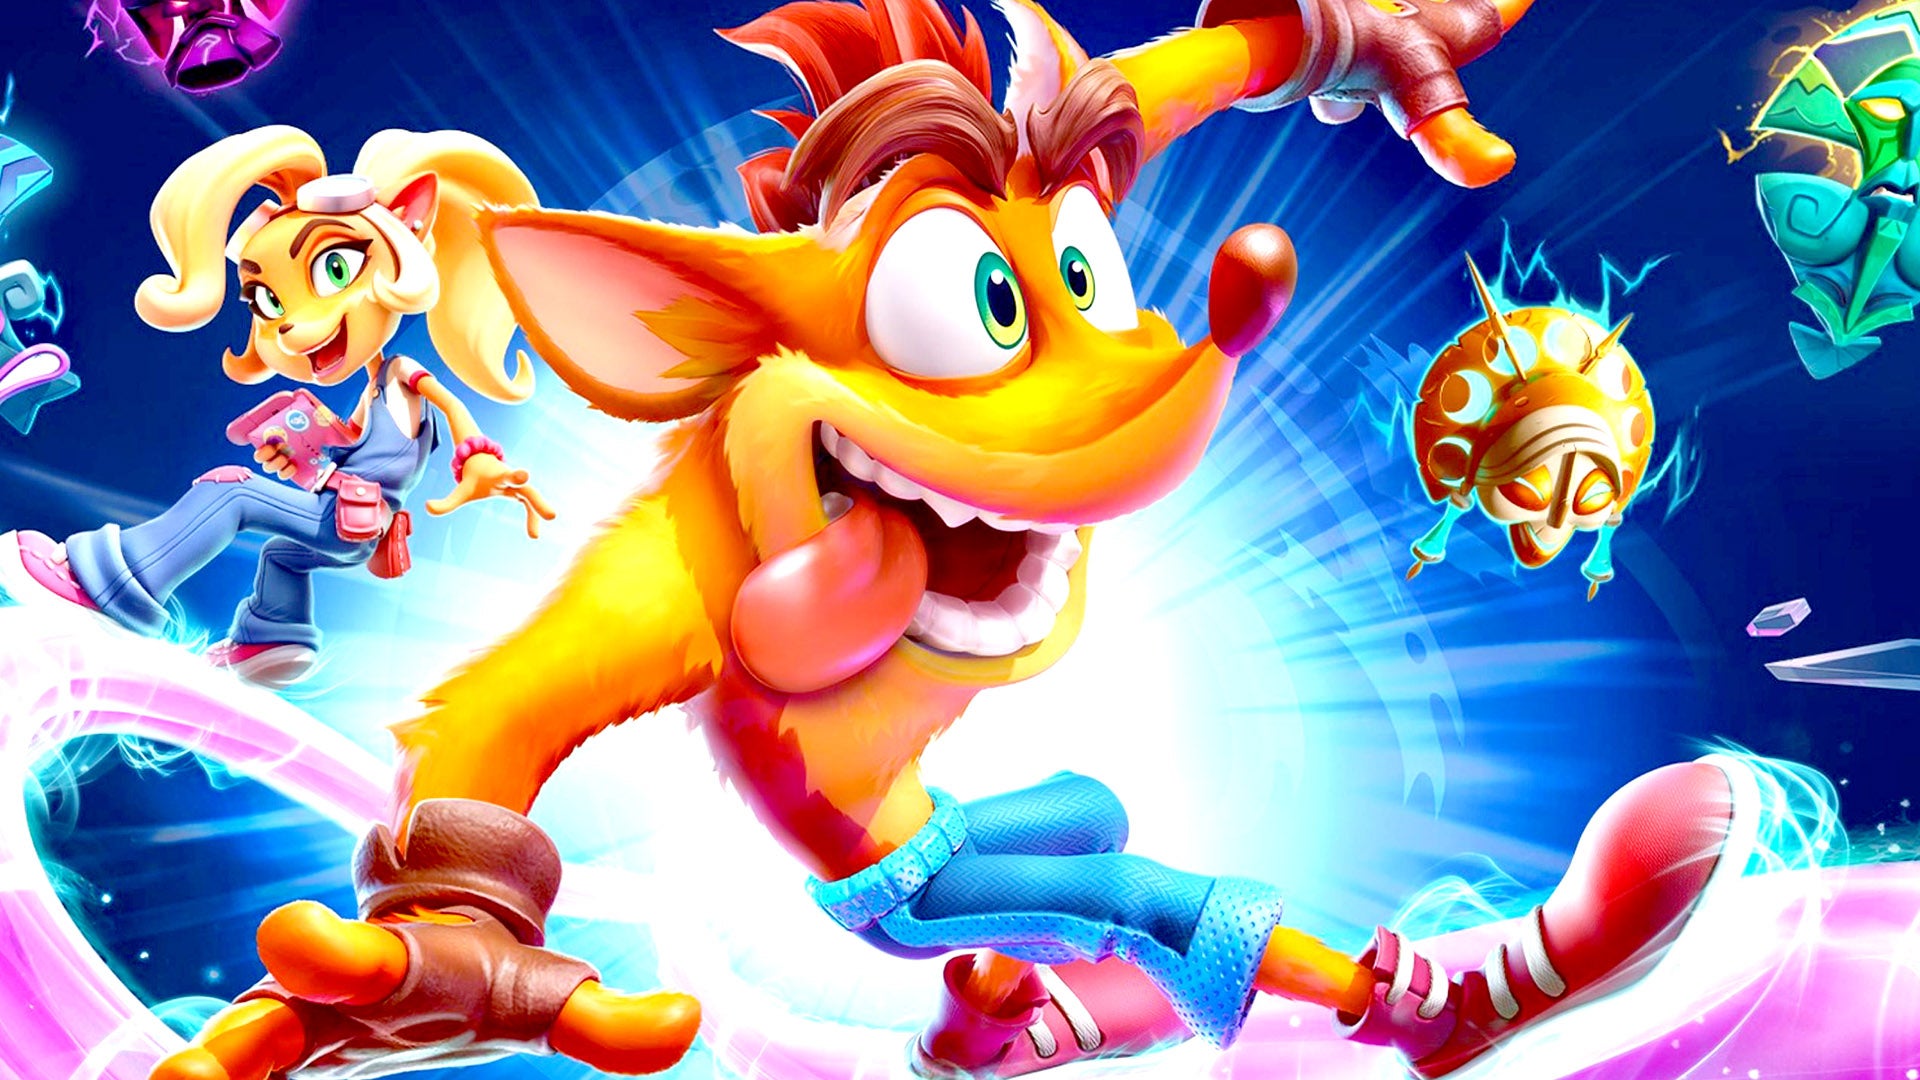 Image for Crash Bandicoot 4 Tech Review: Best Played On Xbox One X + PS4 Pro